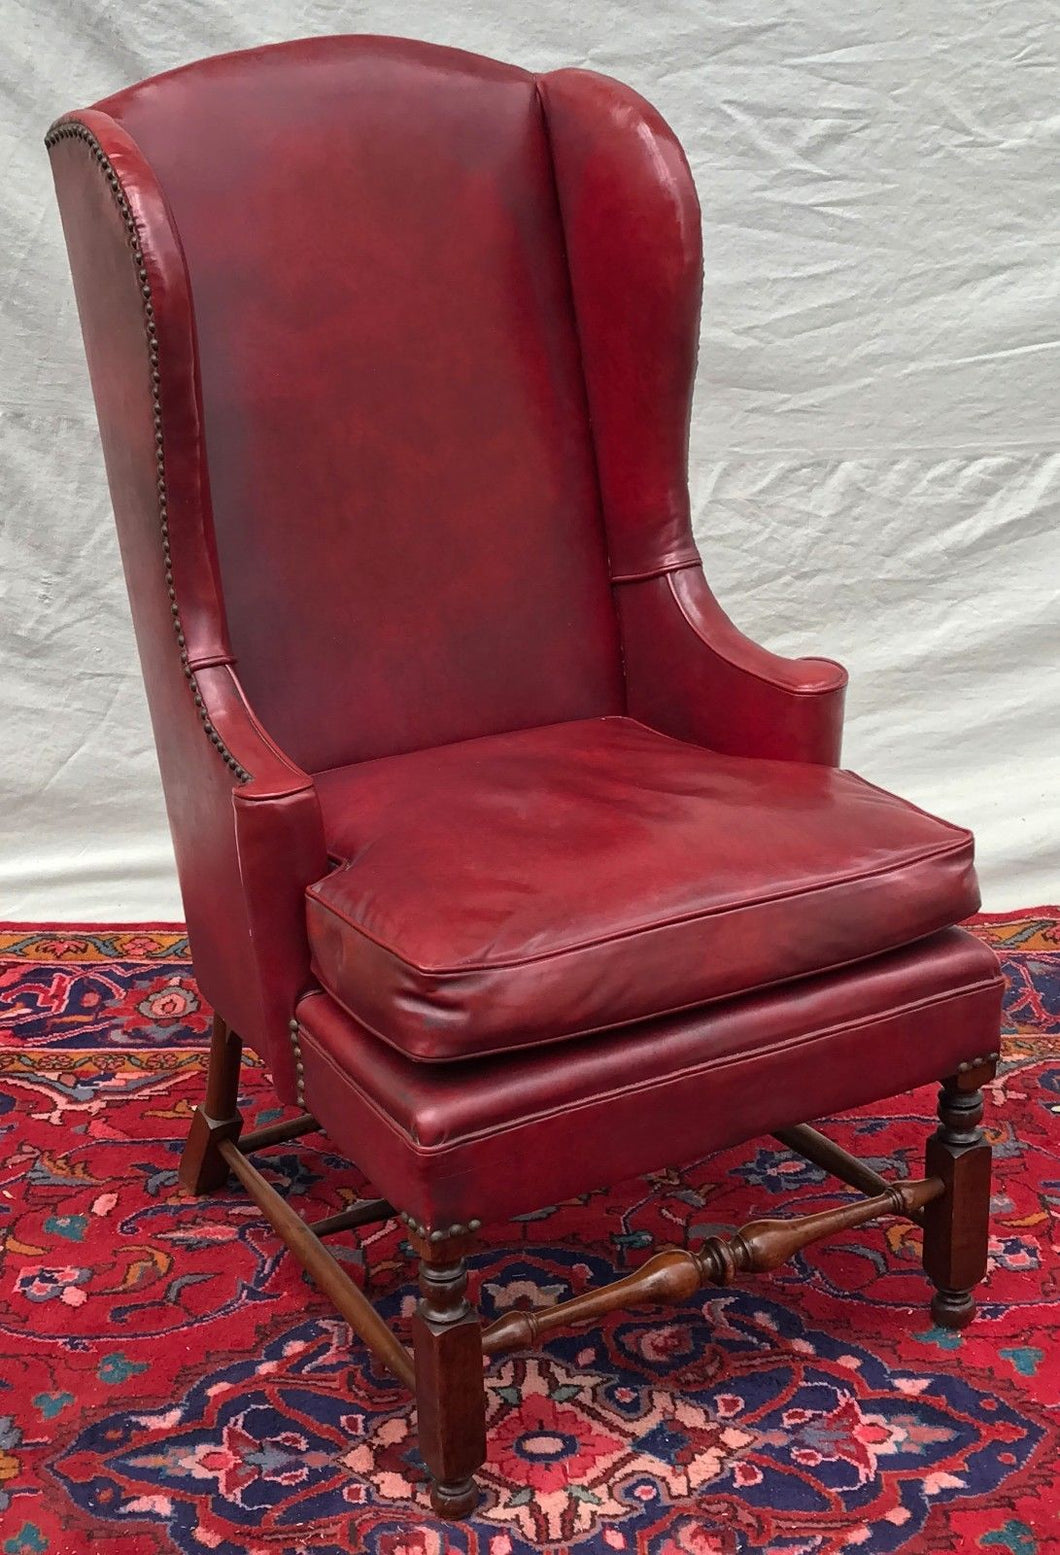 LEATHER ANTIQUE WILLIAM & MARY STYLED WING CHAIR